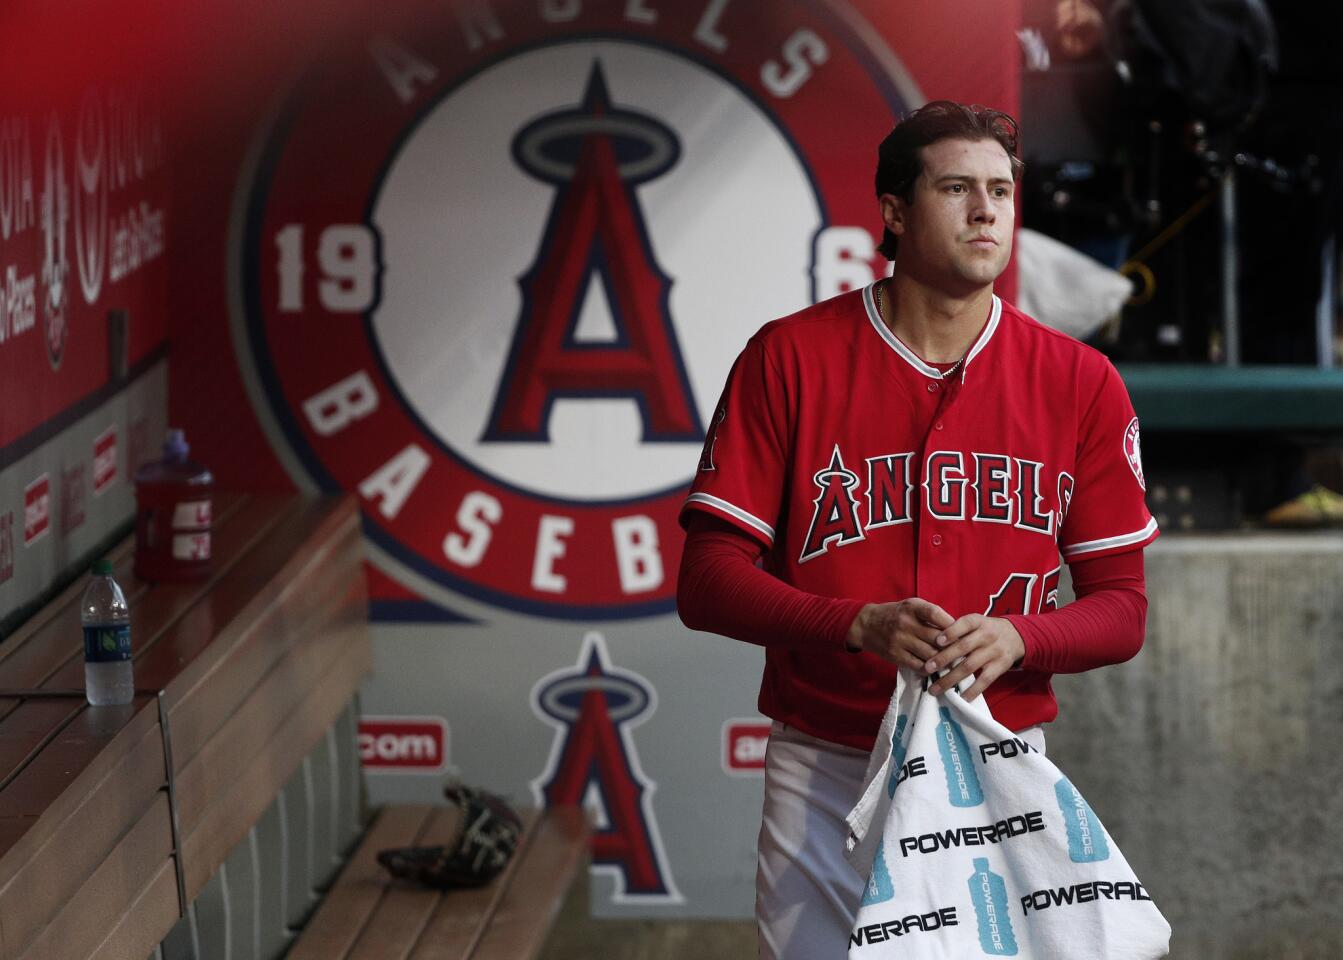 Los Angeles Angels starting pitcher Tyler Skaggs towels off before the game against the Minnesota Twins at Angel Stadium on May 11, 2018.